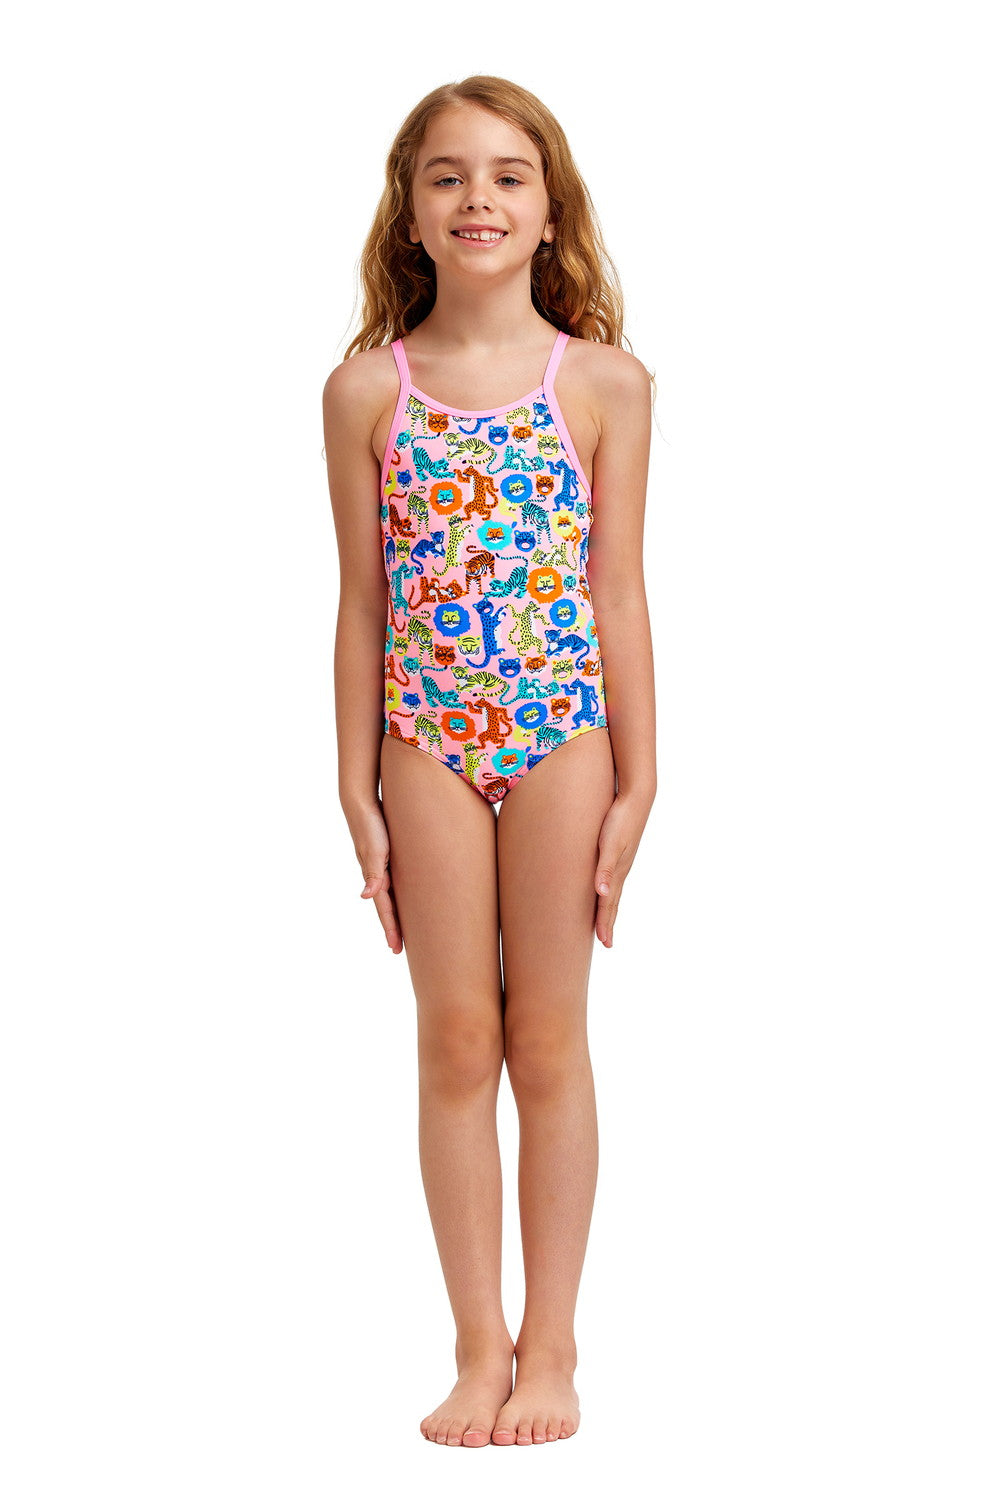 Feline Fiesta Print One Piece Swimsuit FG01T - Toddler Ages 1-7